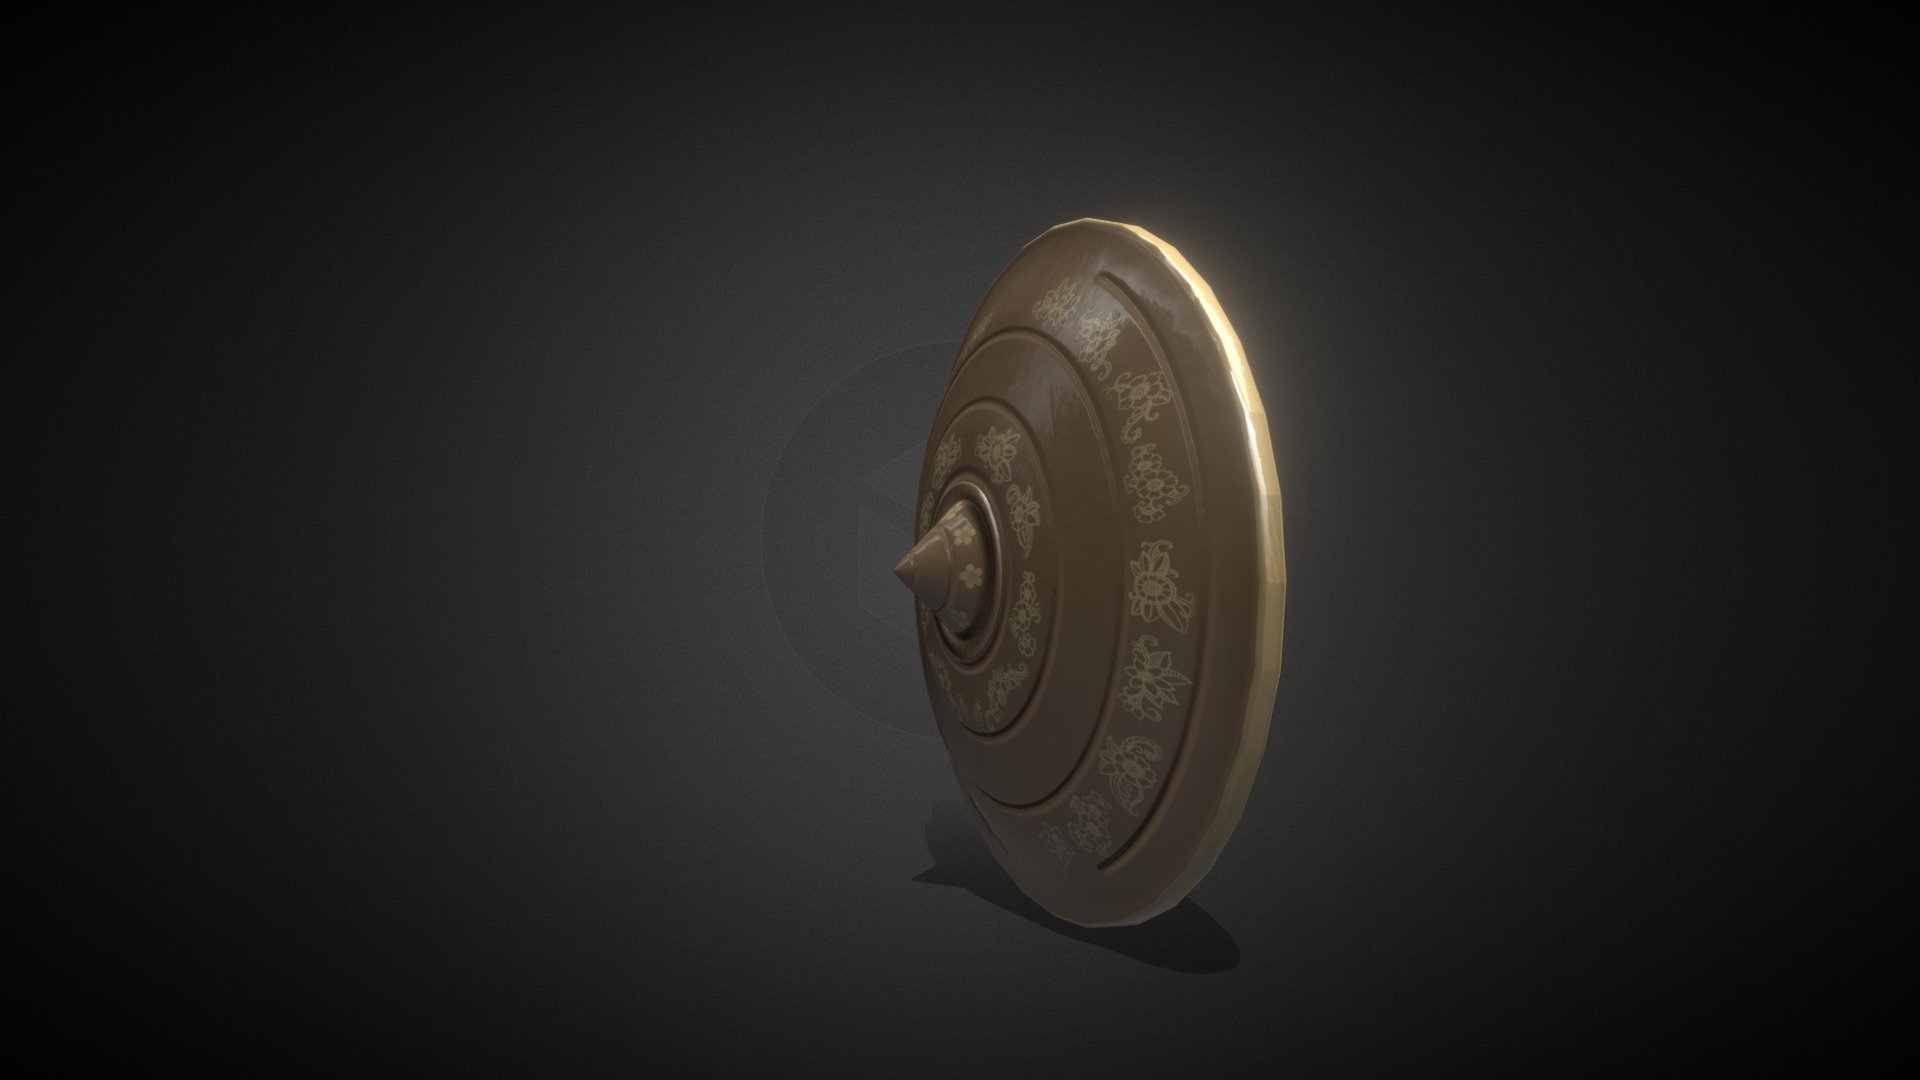 One of my first modeling. Not perfect one but I love it !
I use this asset in a video game, it is well optimized.

The softwares I used :
- Blender for modeling
- Substance Painter for texturing - Bronze Shield - 3D model by Maxime Salesse (@msalesse) 3d model